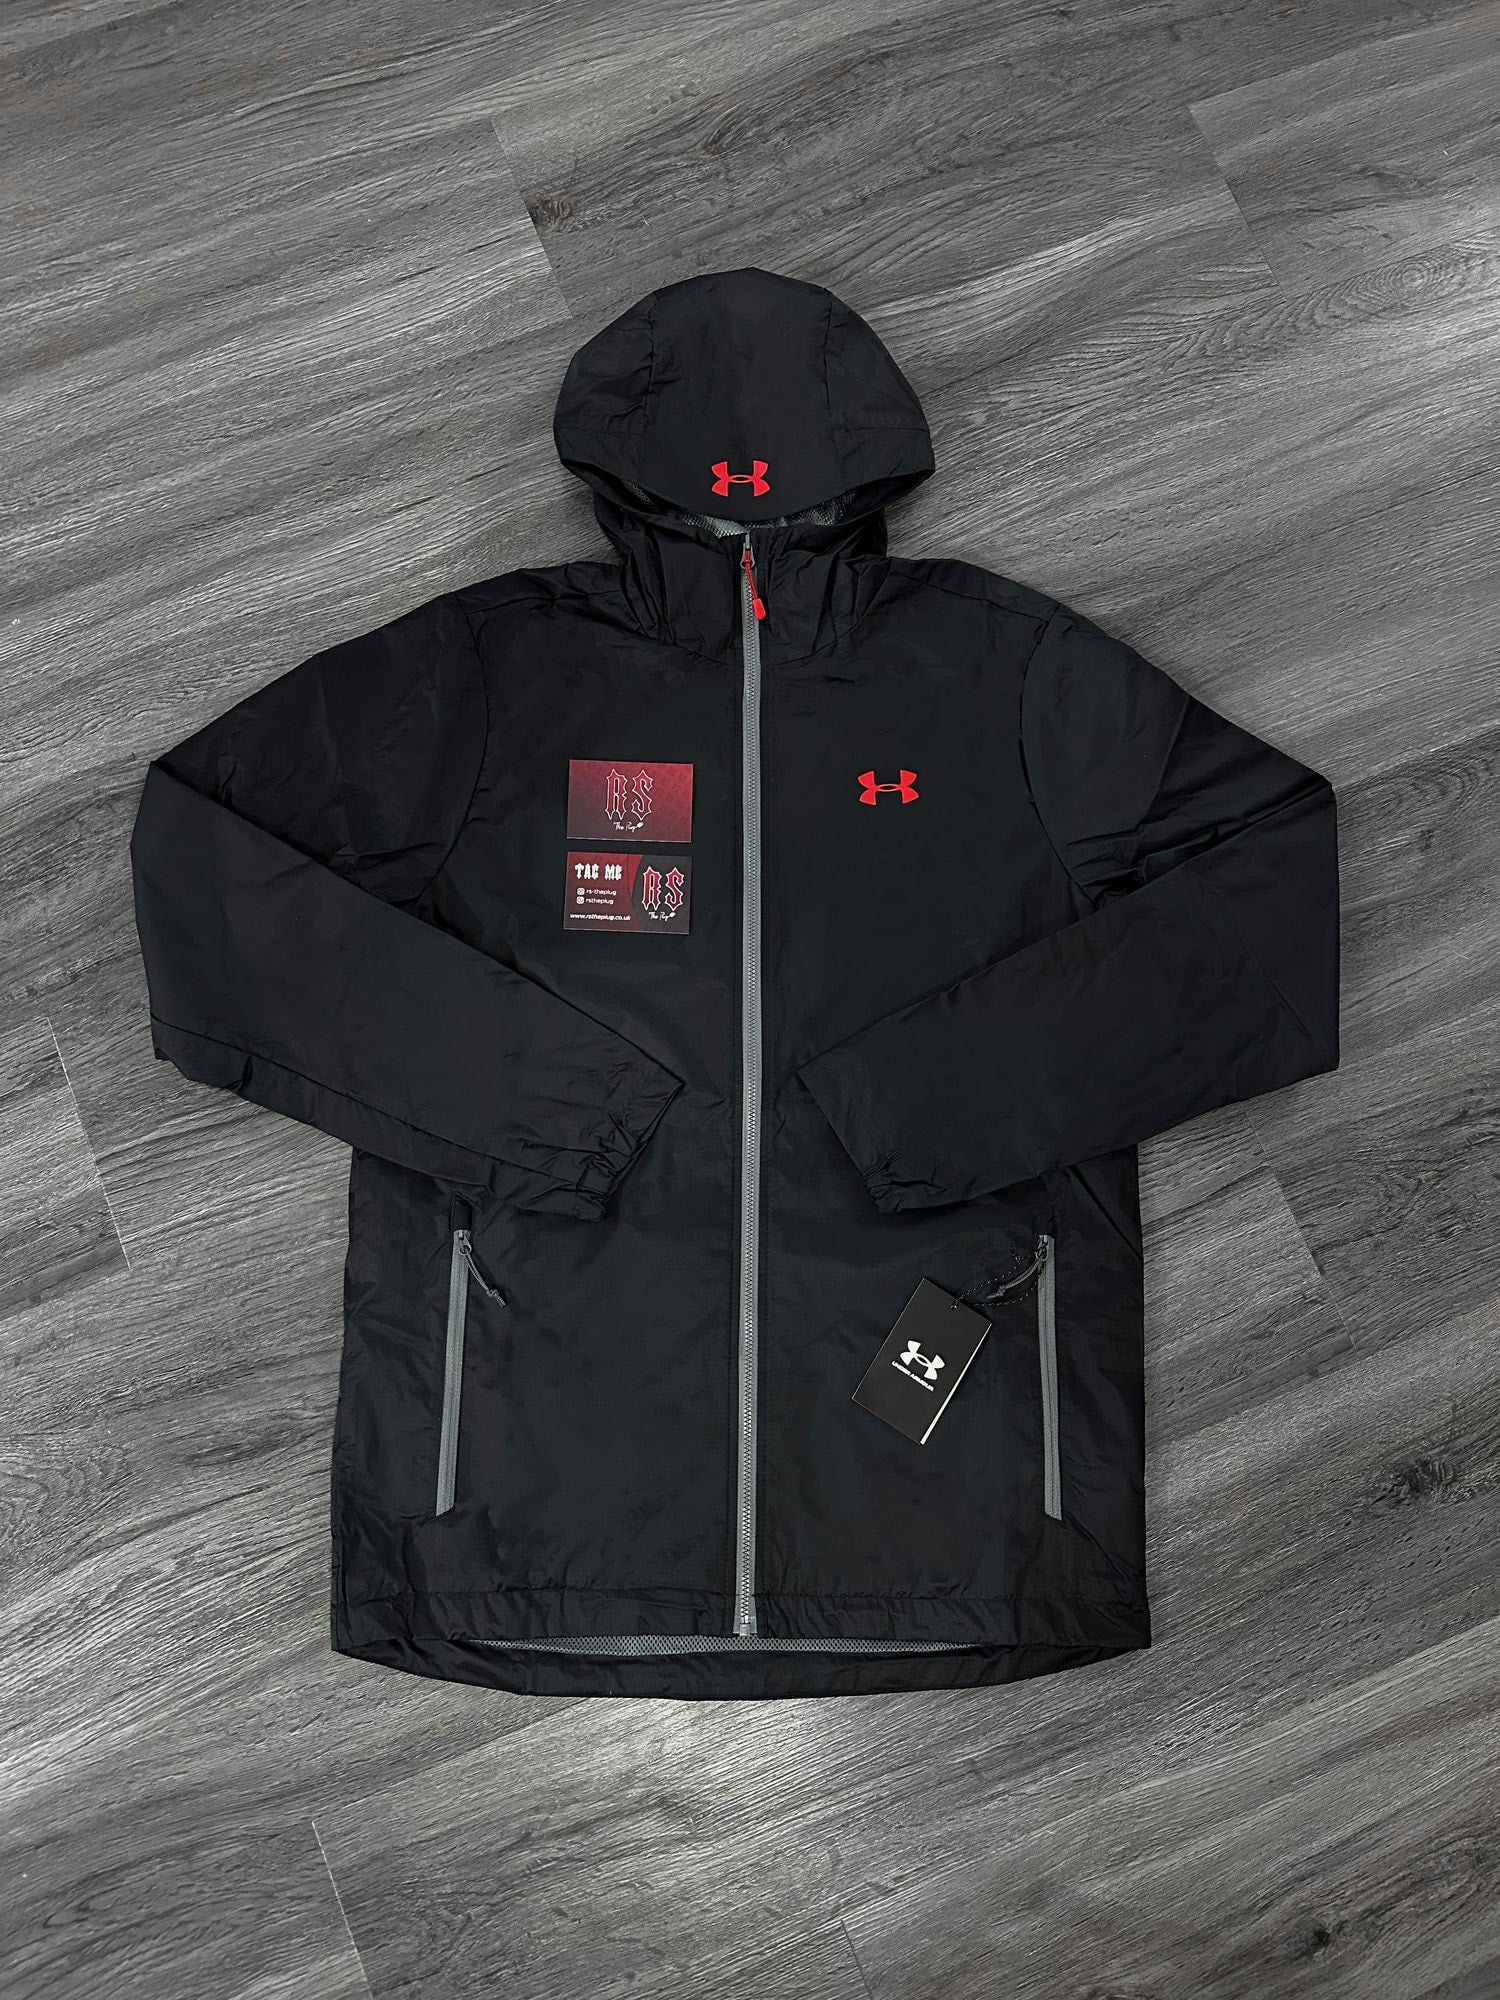 Under Armour Training Jacket Black Red